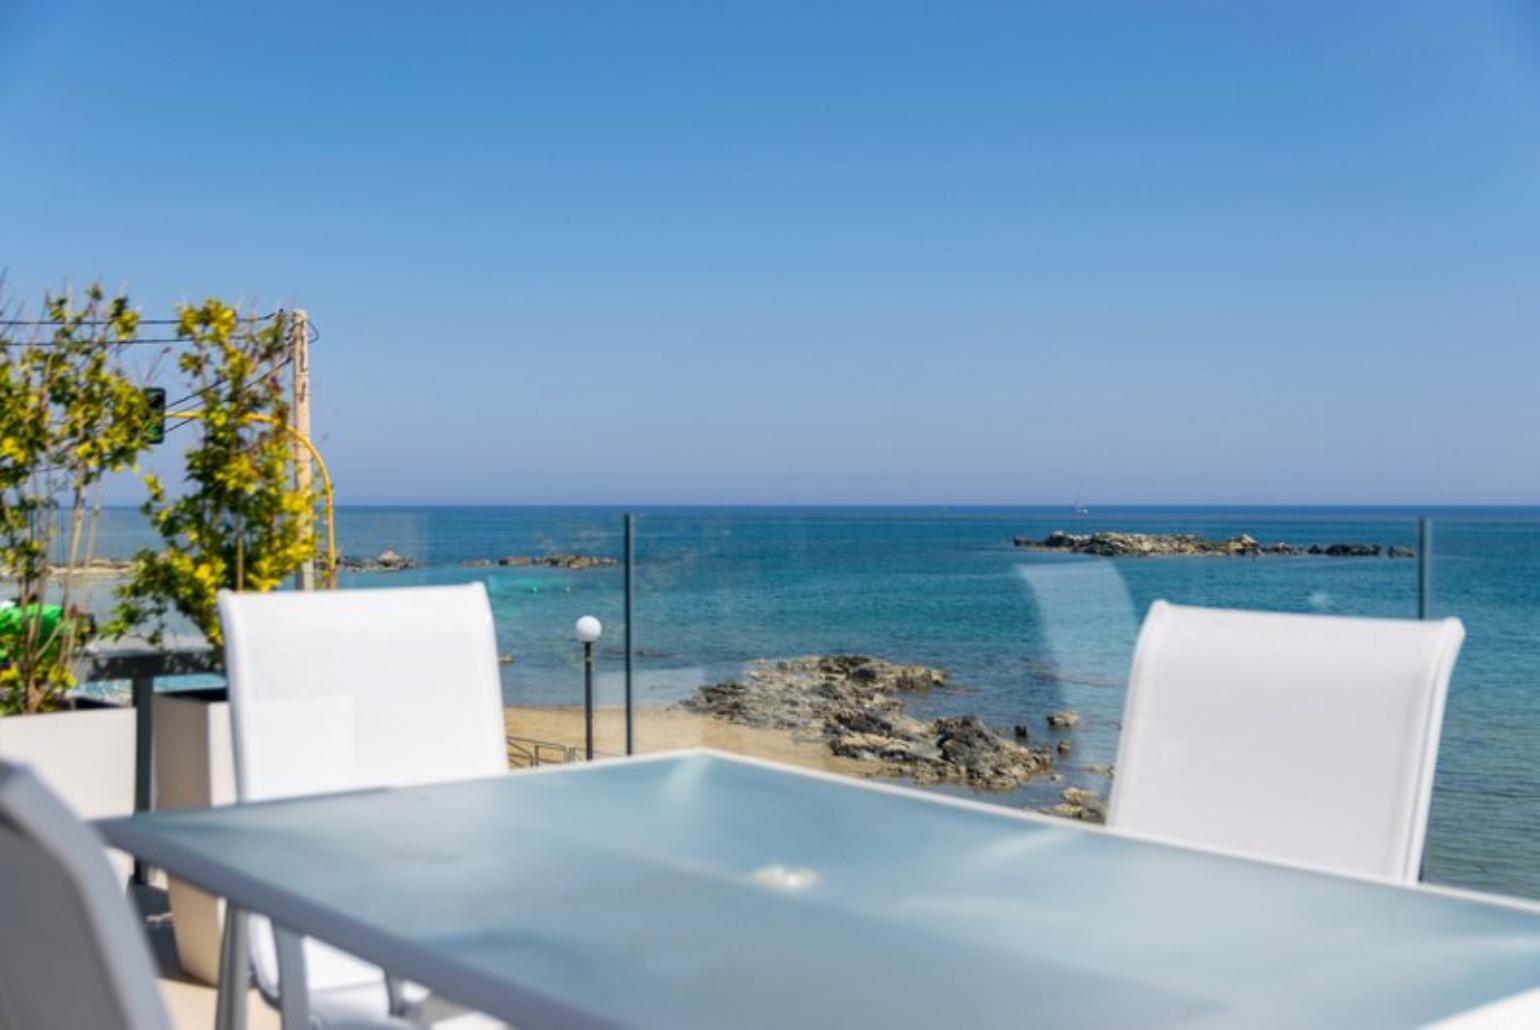 Outdoor dining area with beautiful sea view